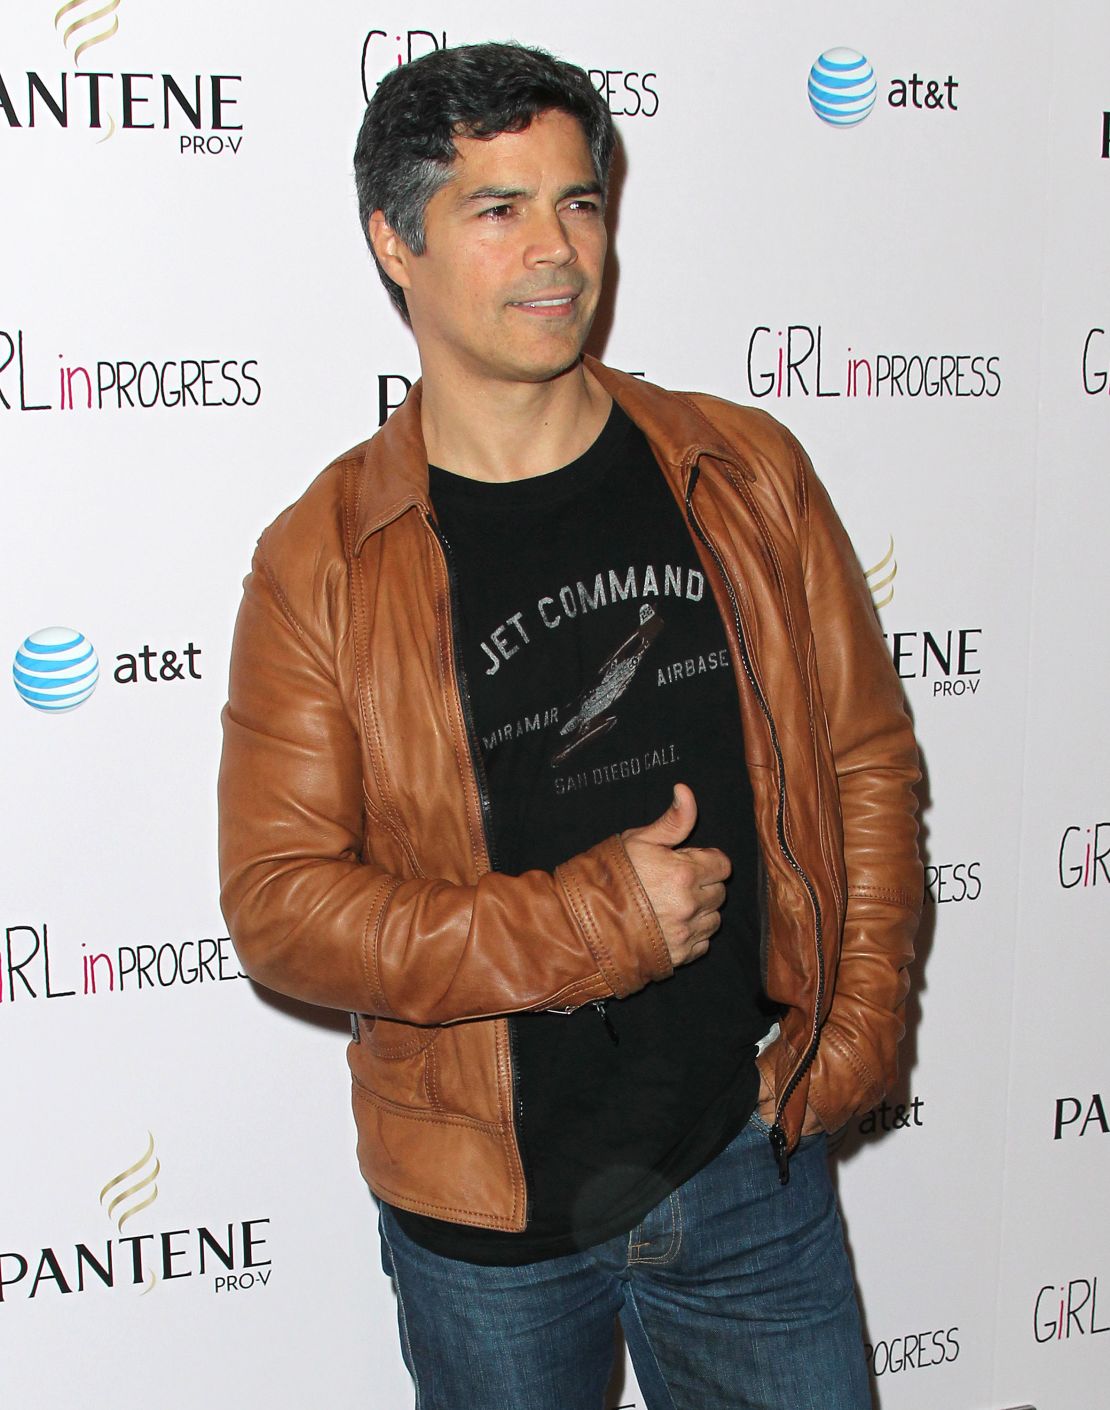 Actor Esai Morales has defined Latino stereotypes as the "4 H's of Hollywood."